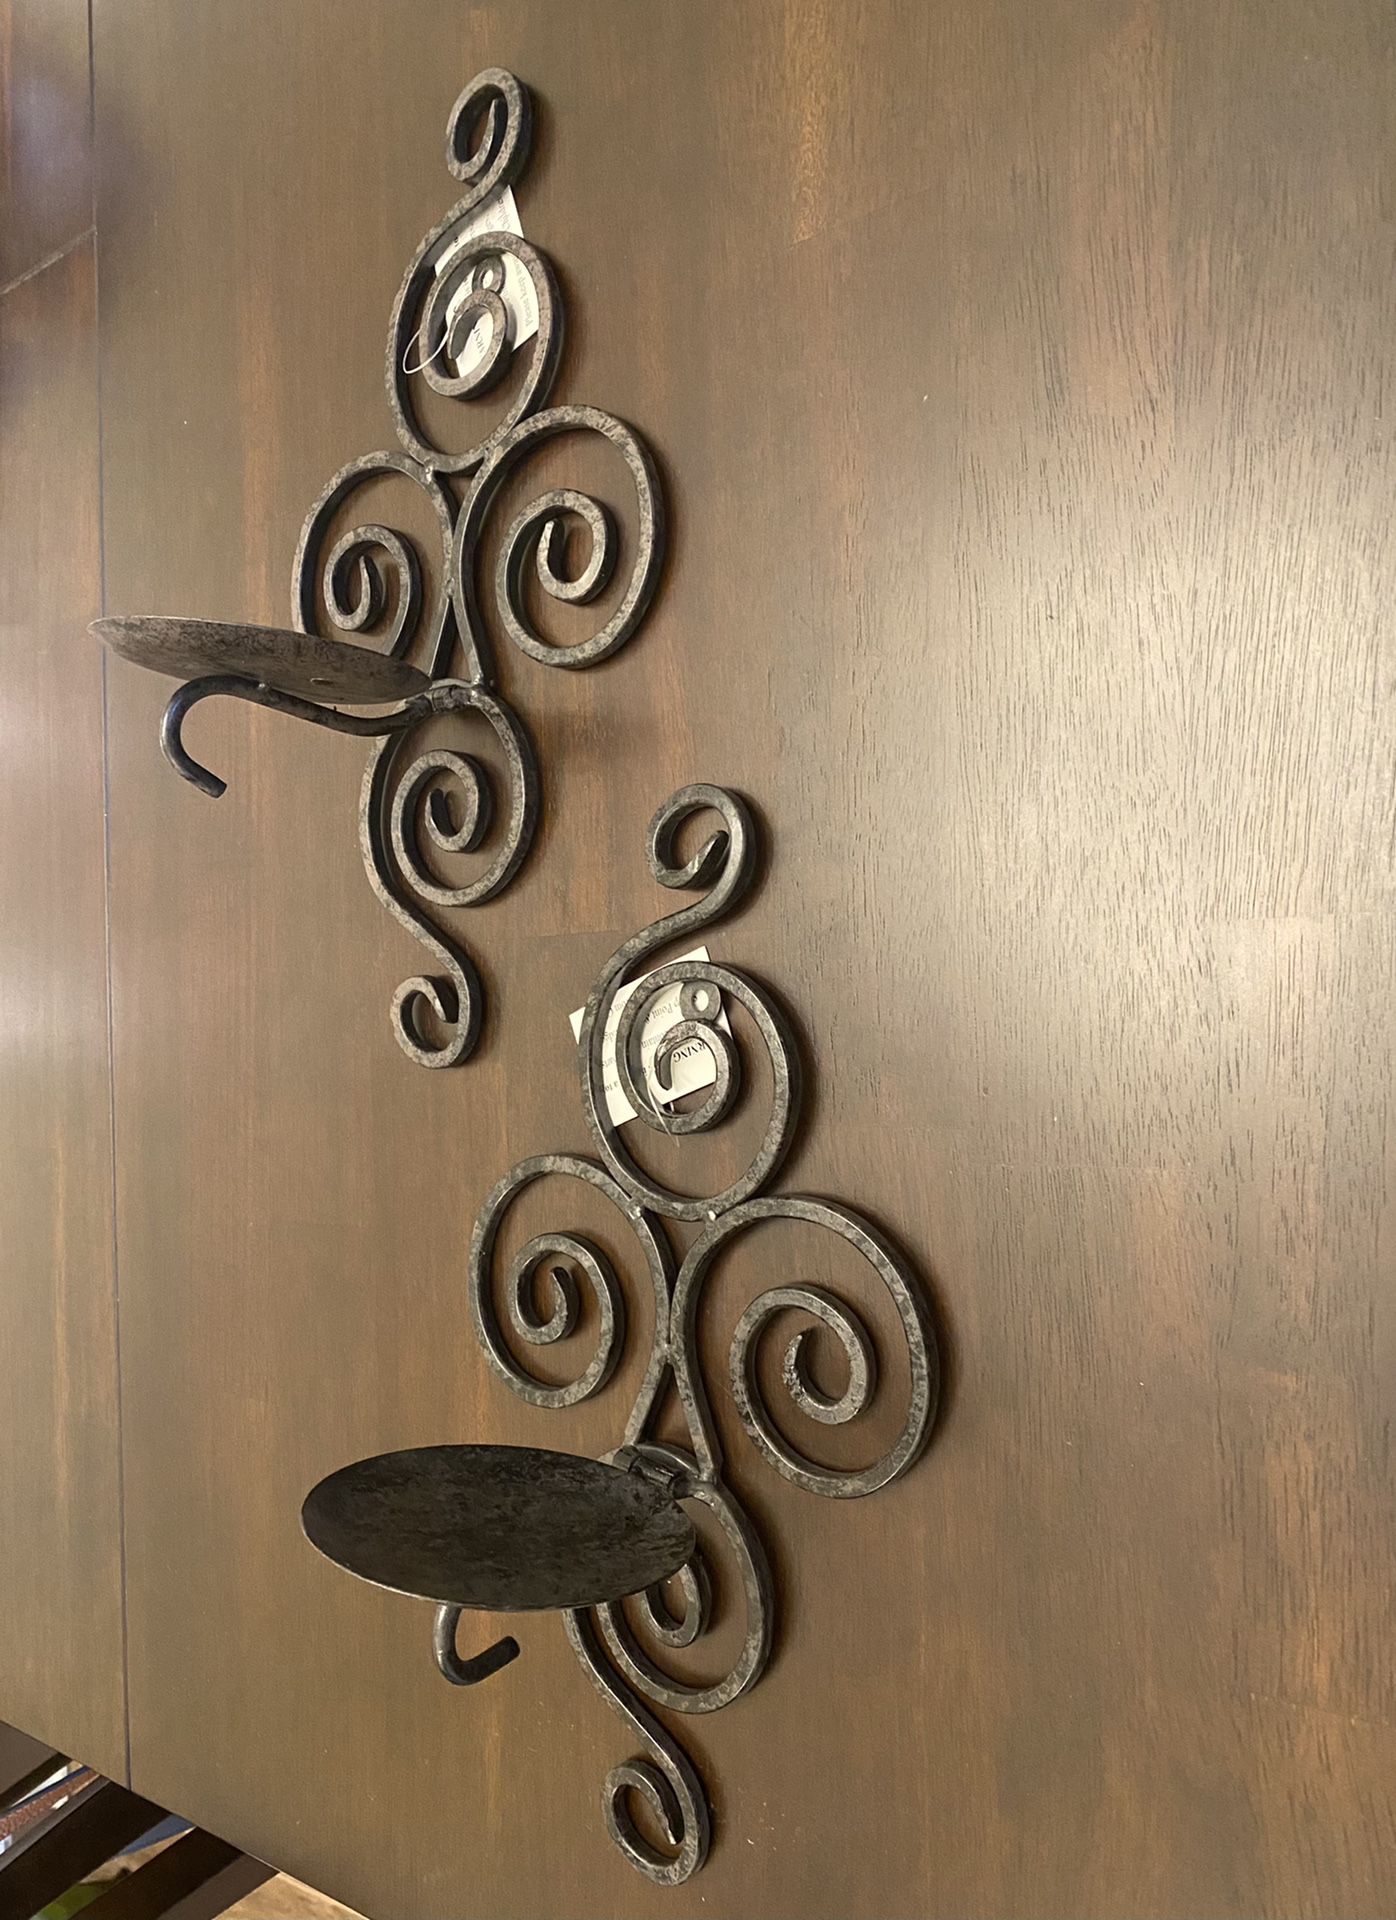 2 New wrought iron wall sconces